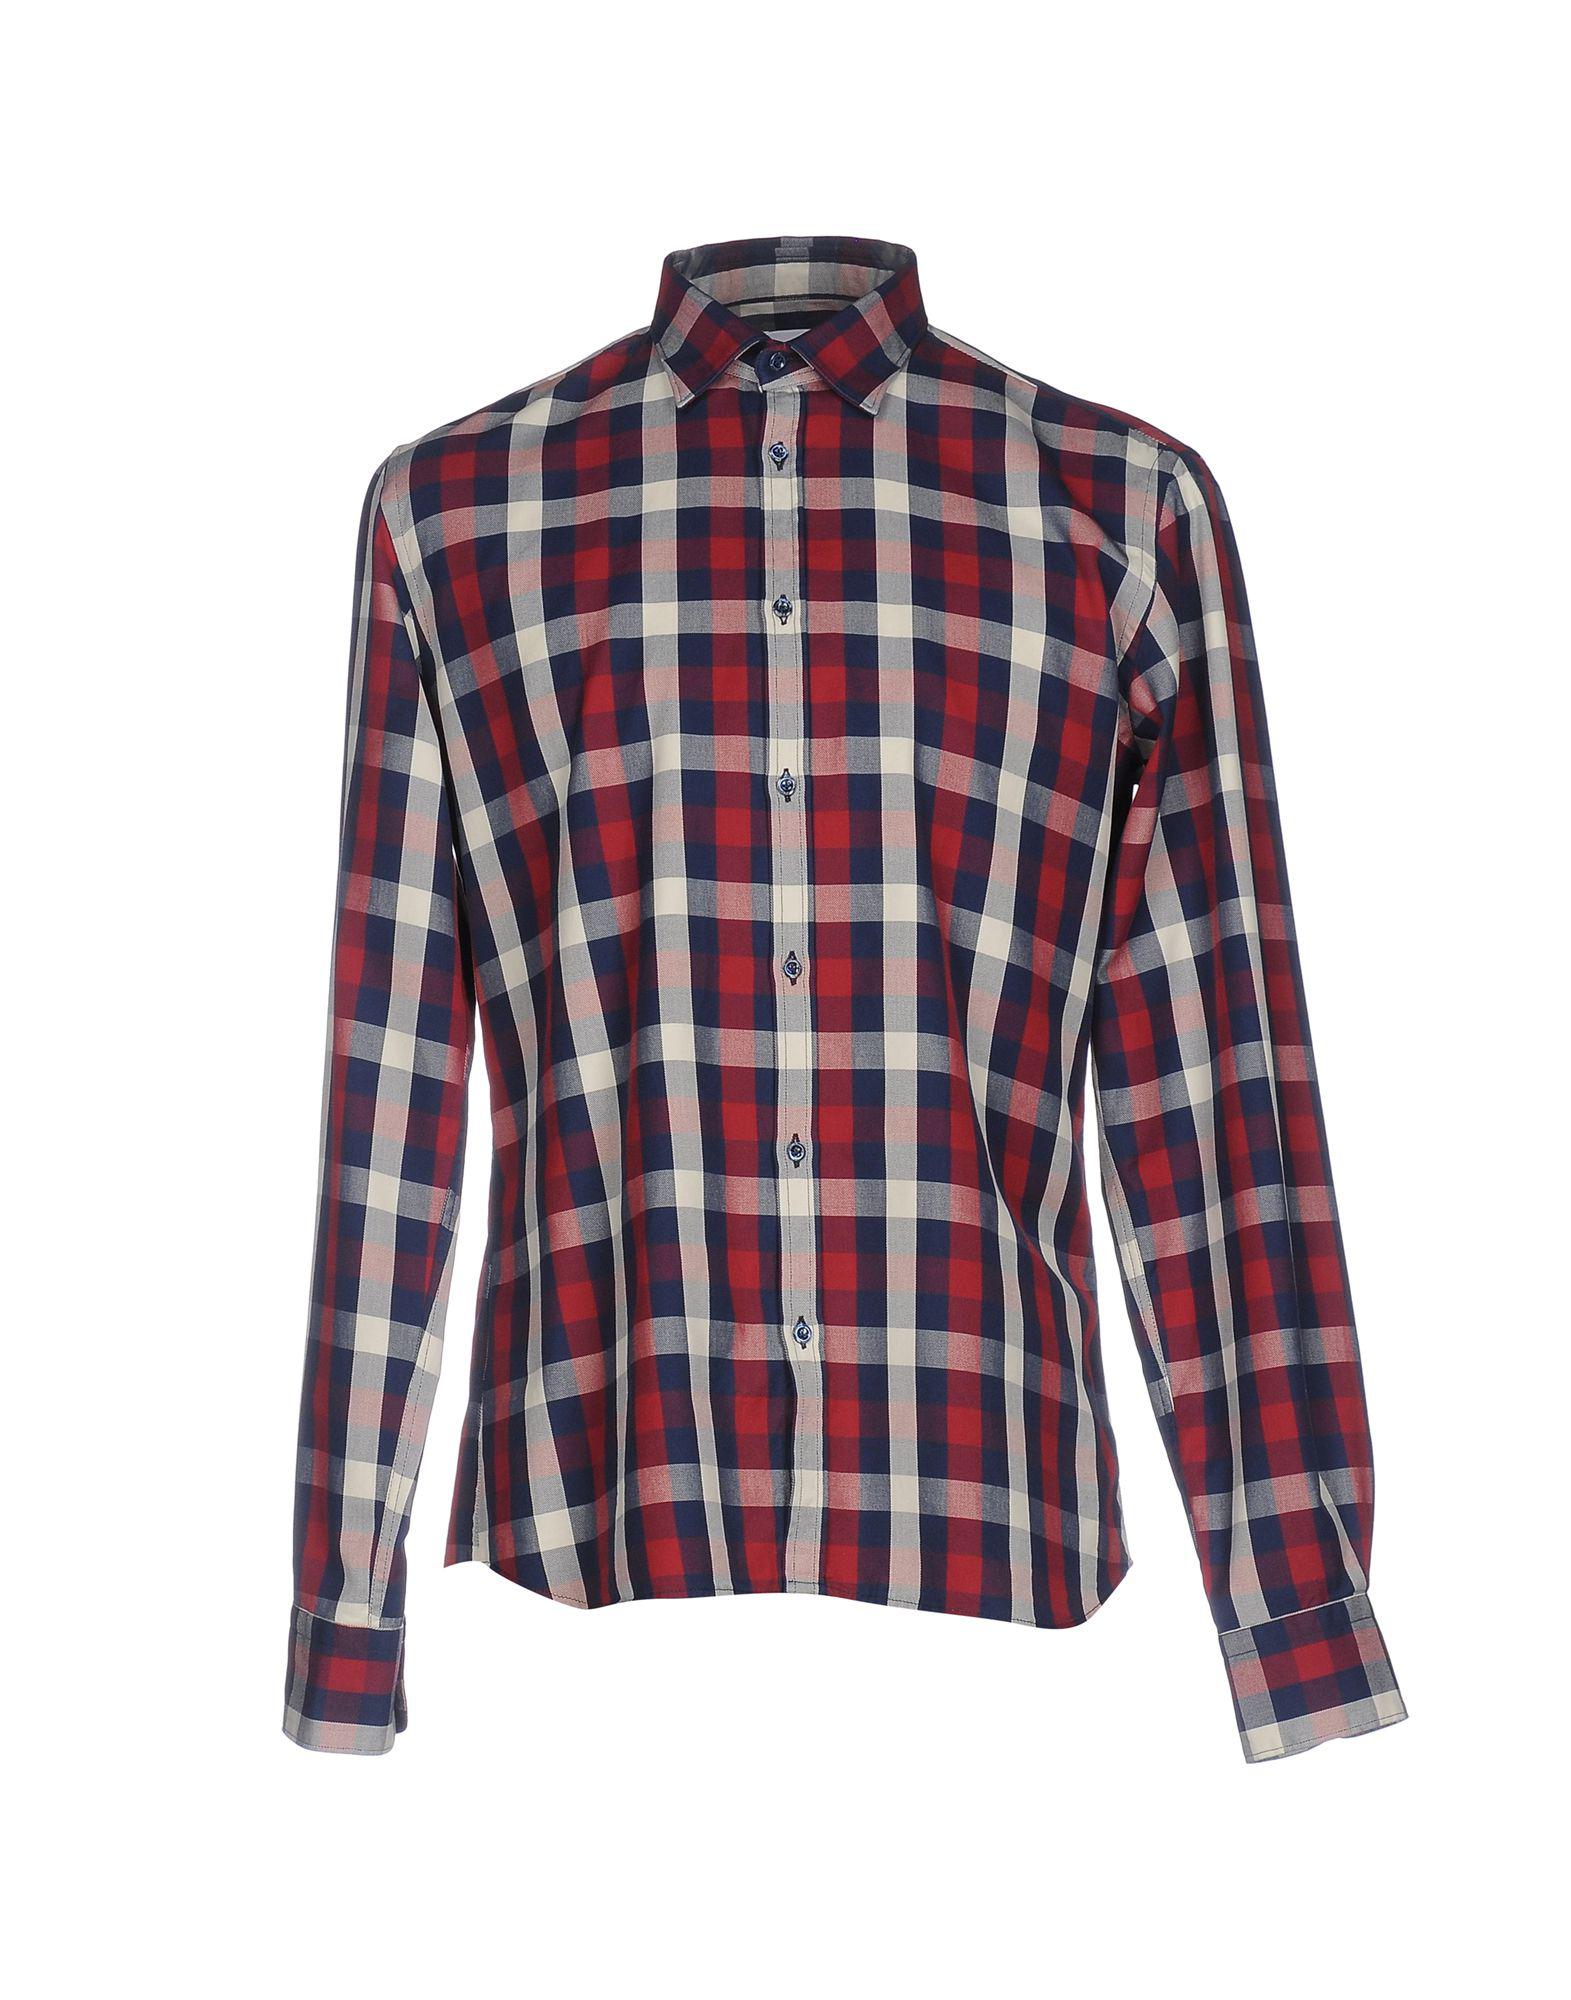 Lyst - Aglini Shirt in Red for Men